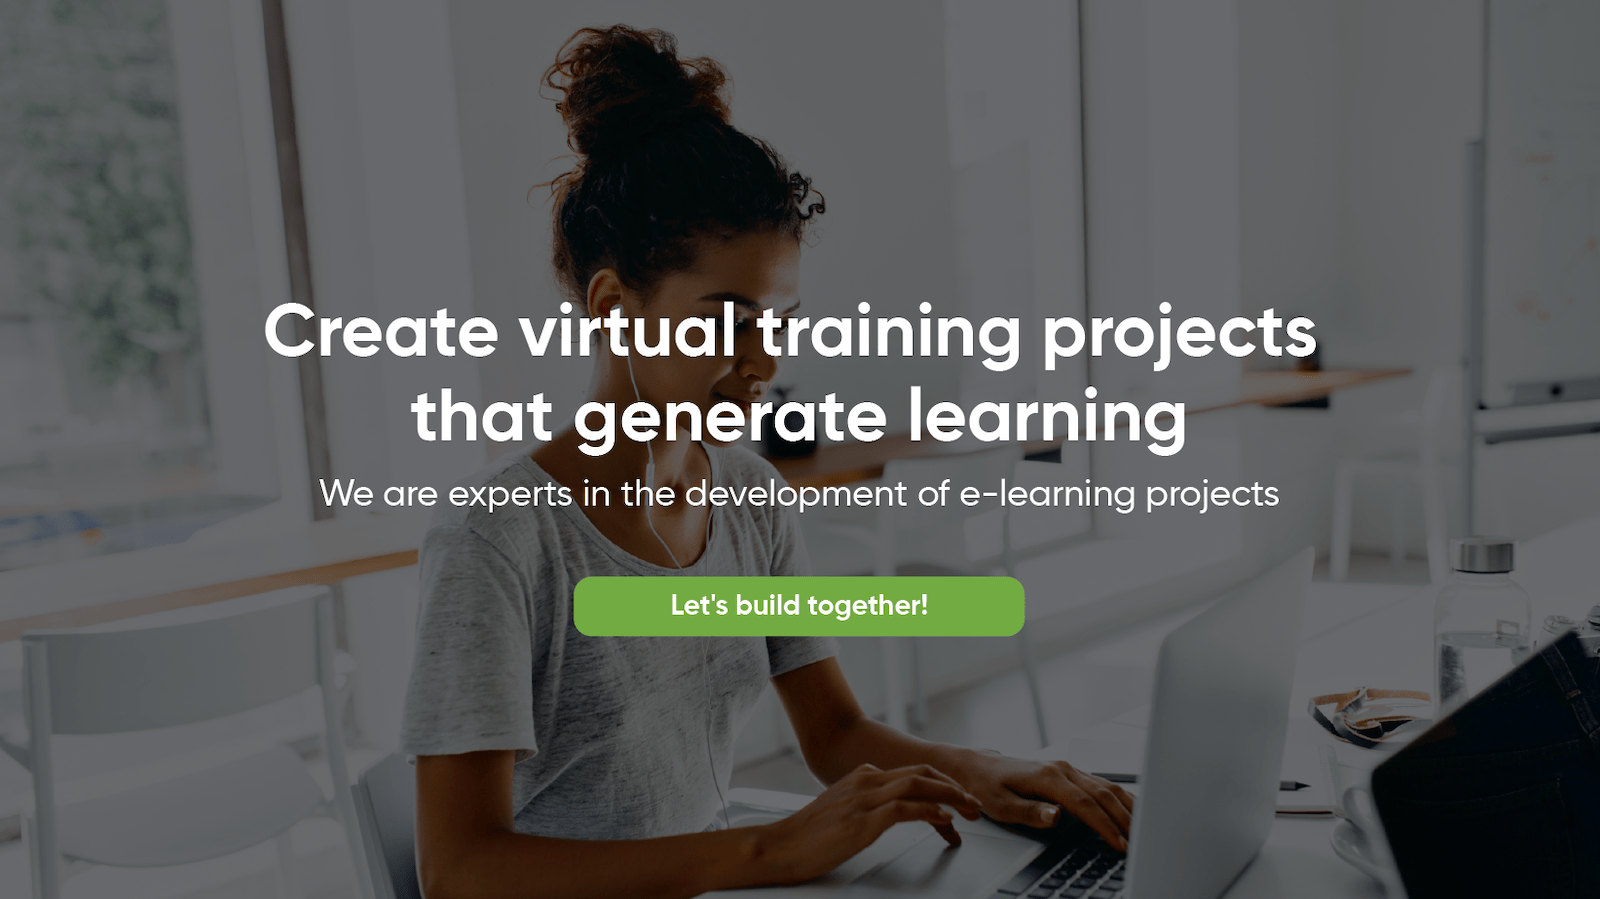 Create virtual training projects with us